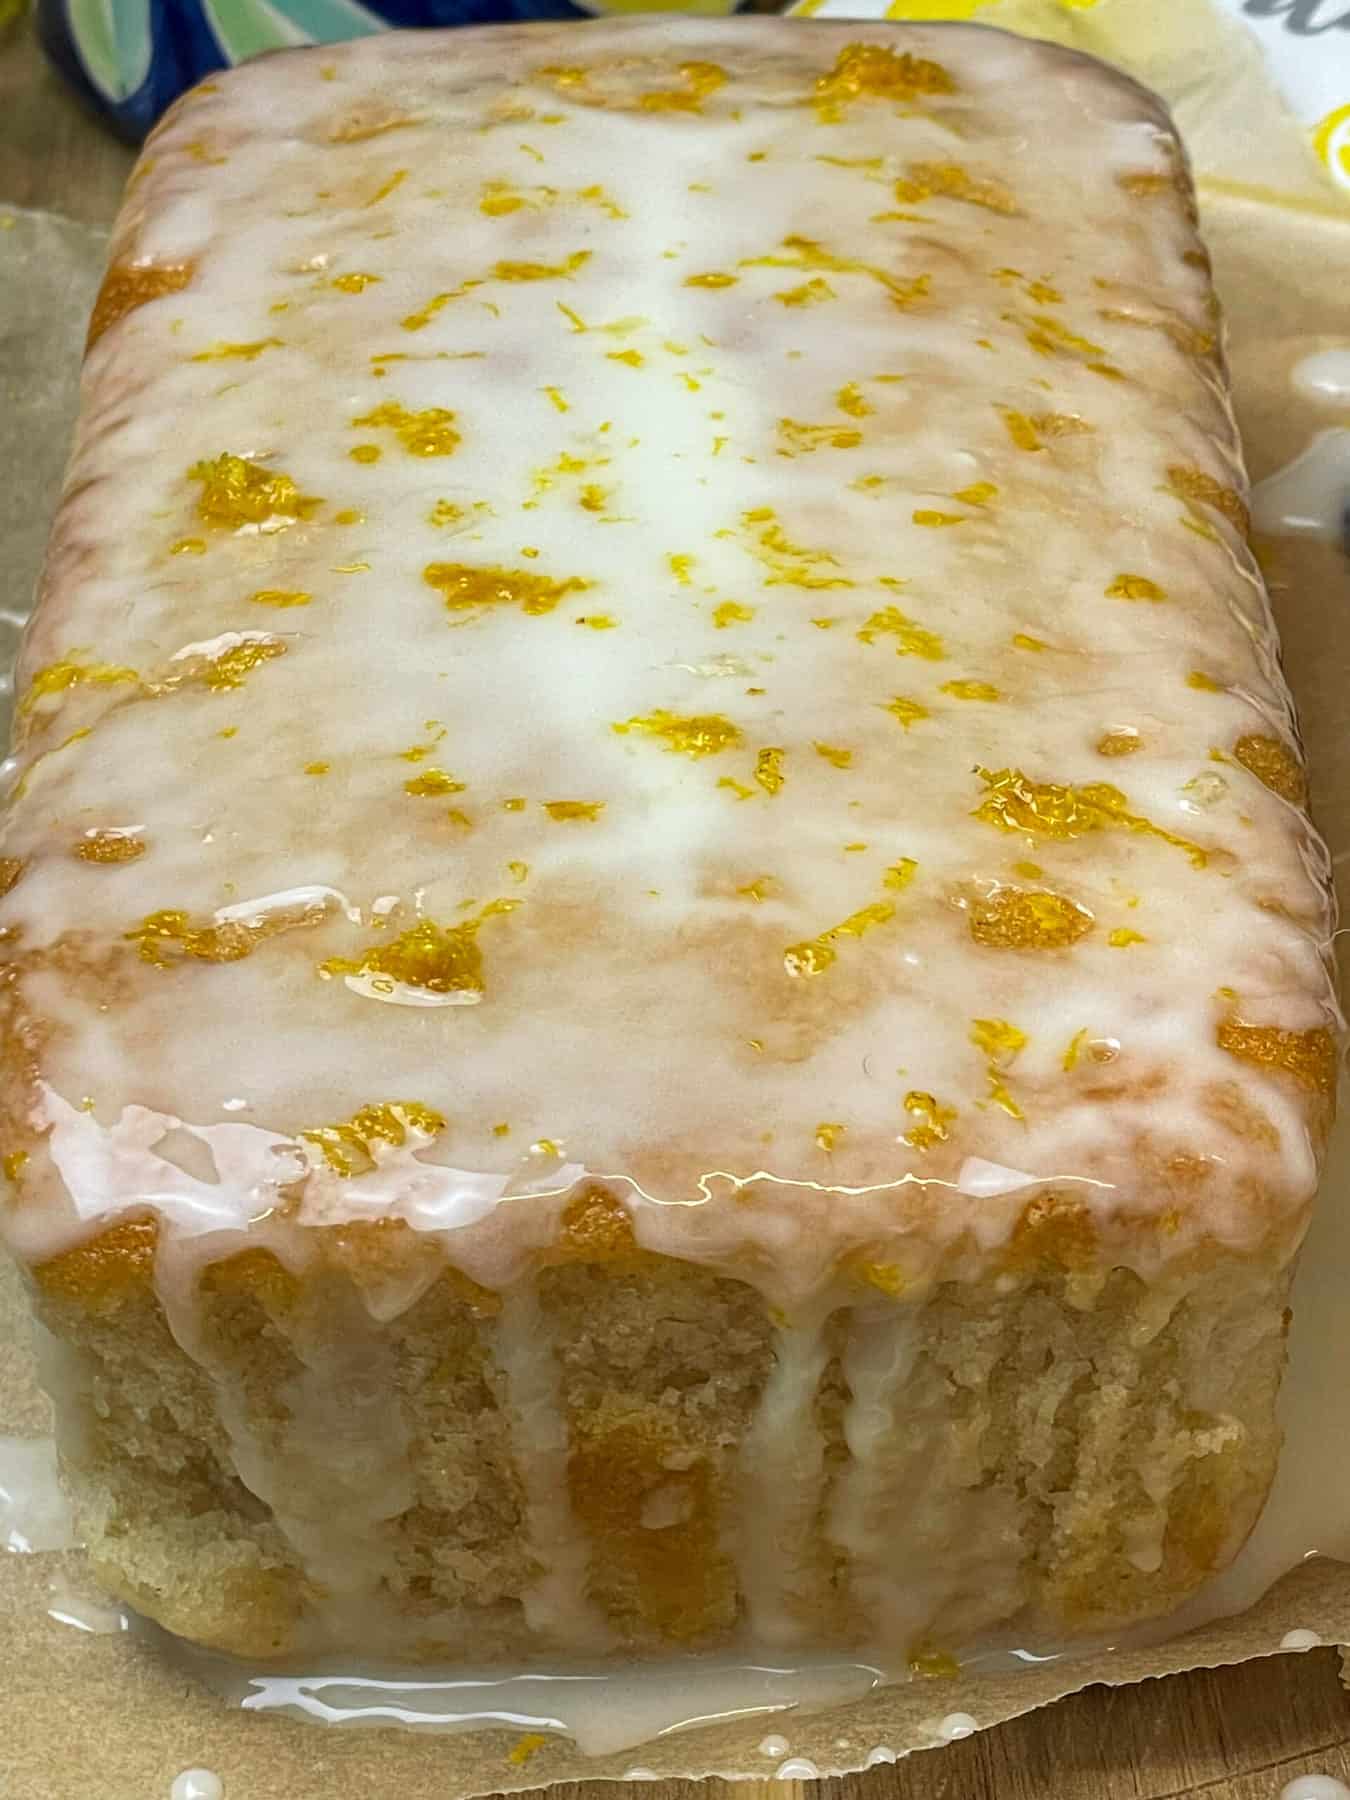 vegan lemon drizzle cake close up on wooden board, featured image.